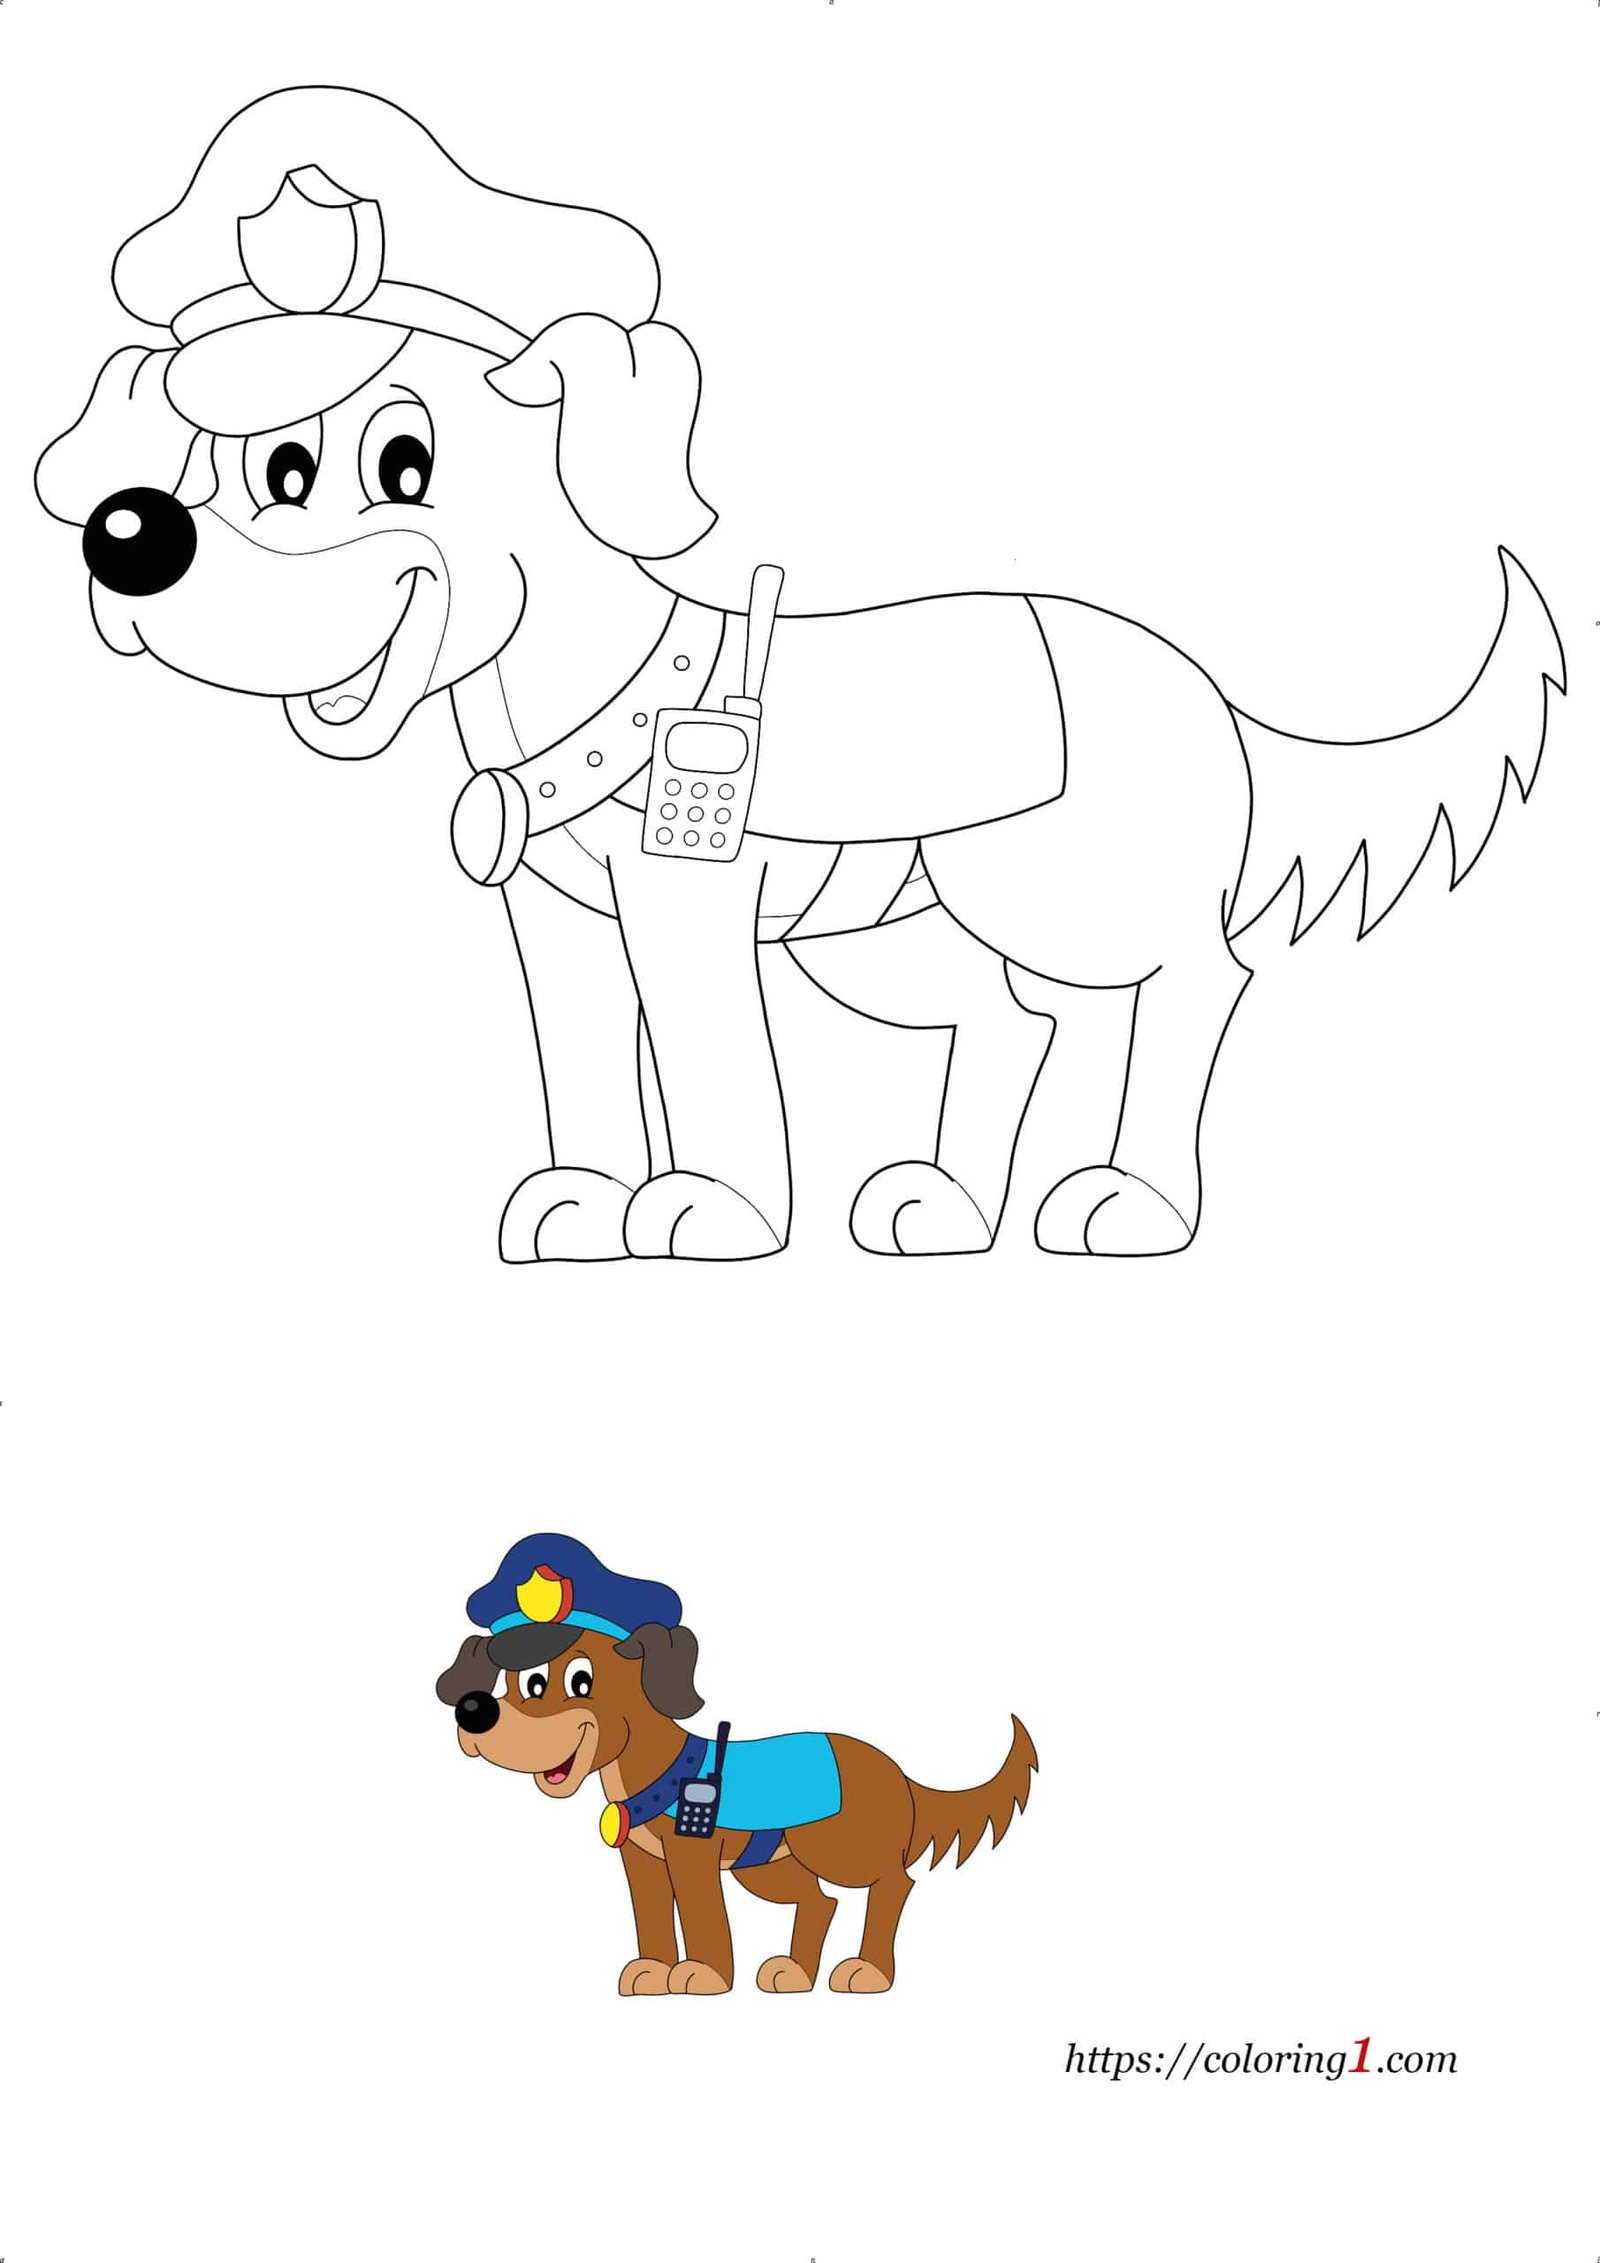 Police Dog colouring page for kids to print online